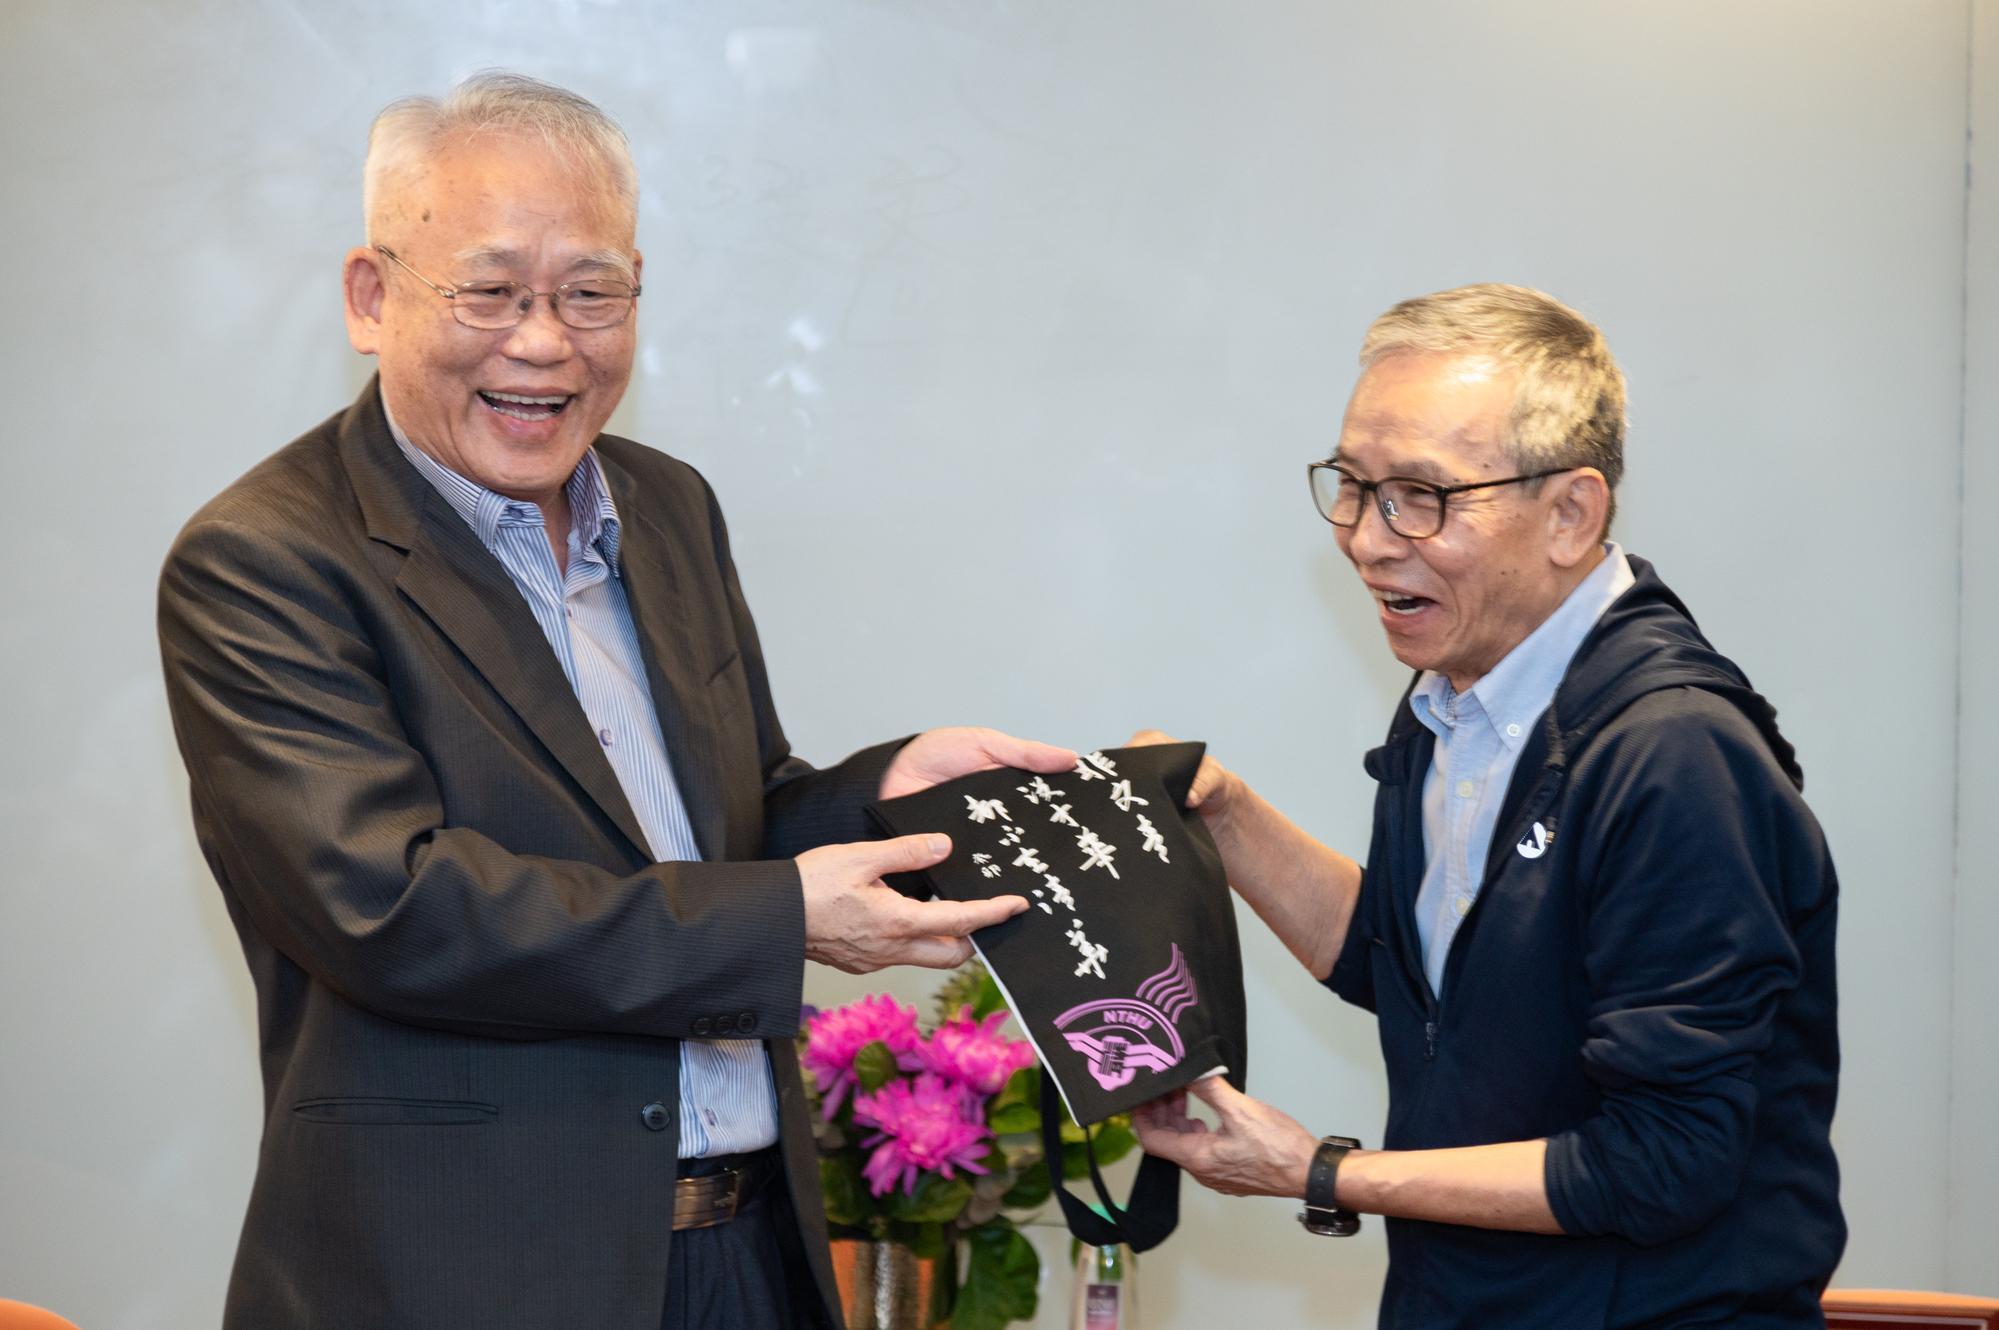 NTHU Senior Vice President Nyan-hwa Tai (戴念華) (left) presents the letter of appointment to Nien-jen Wu (吳念真) as writer-in-residence 2023.